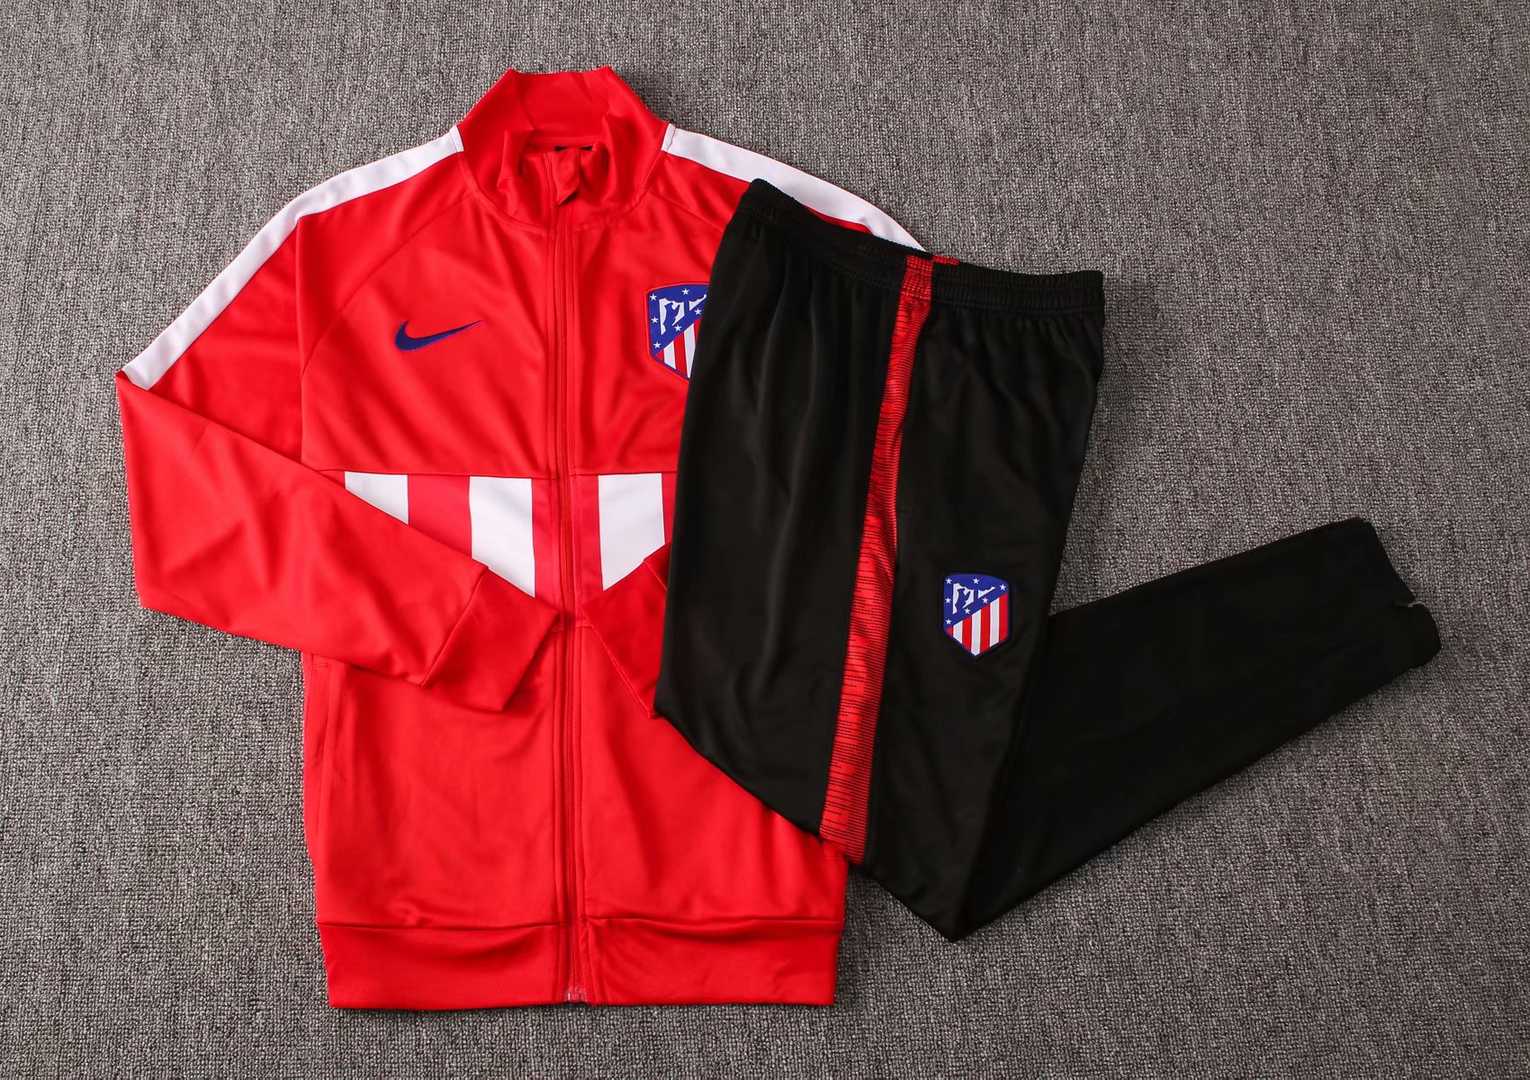 2019/20 Atletico Madrid High Neck Red Mens Soccer Training Suit(Jacket + Pants)